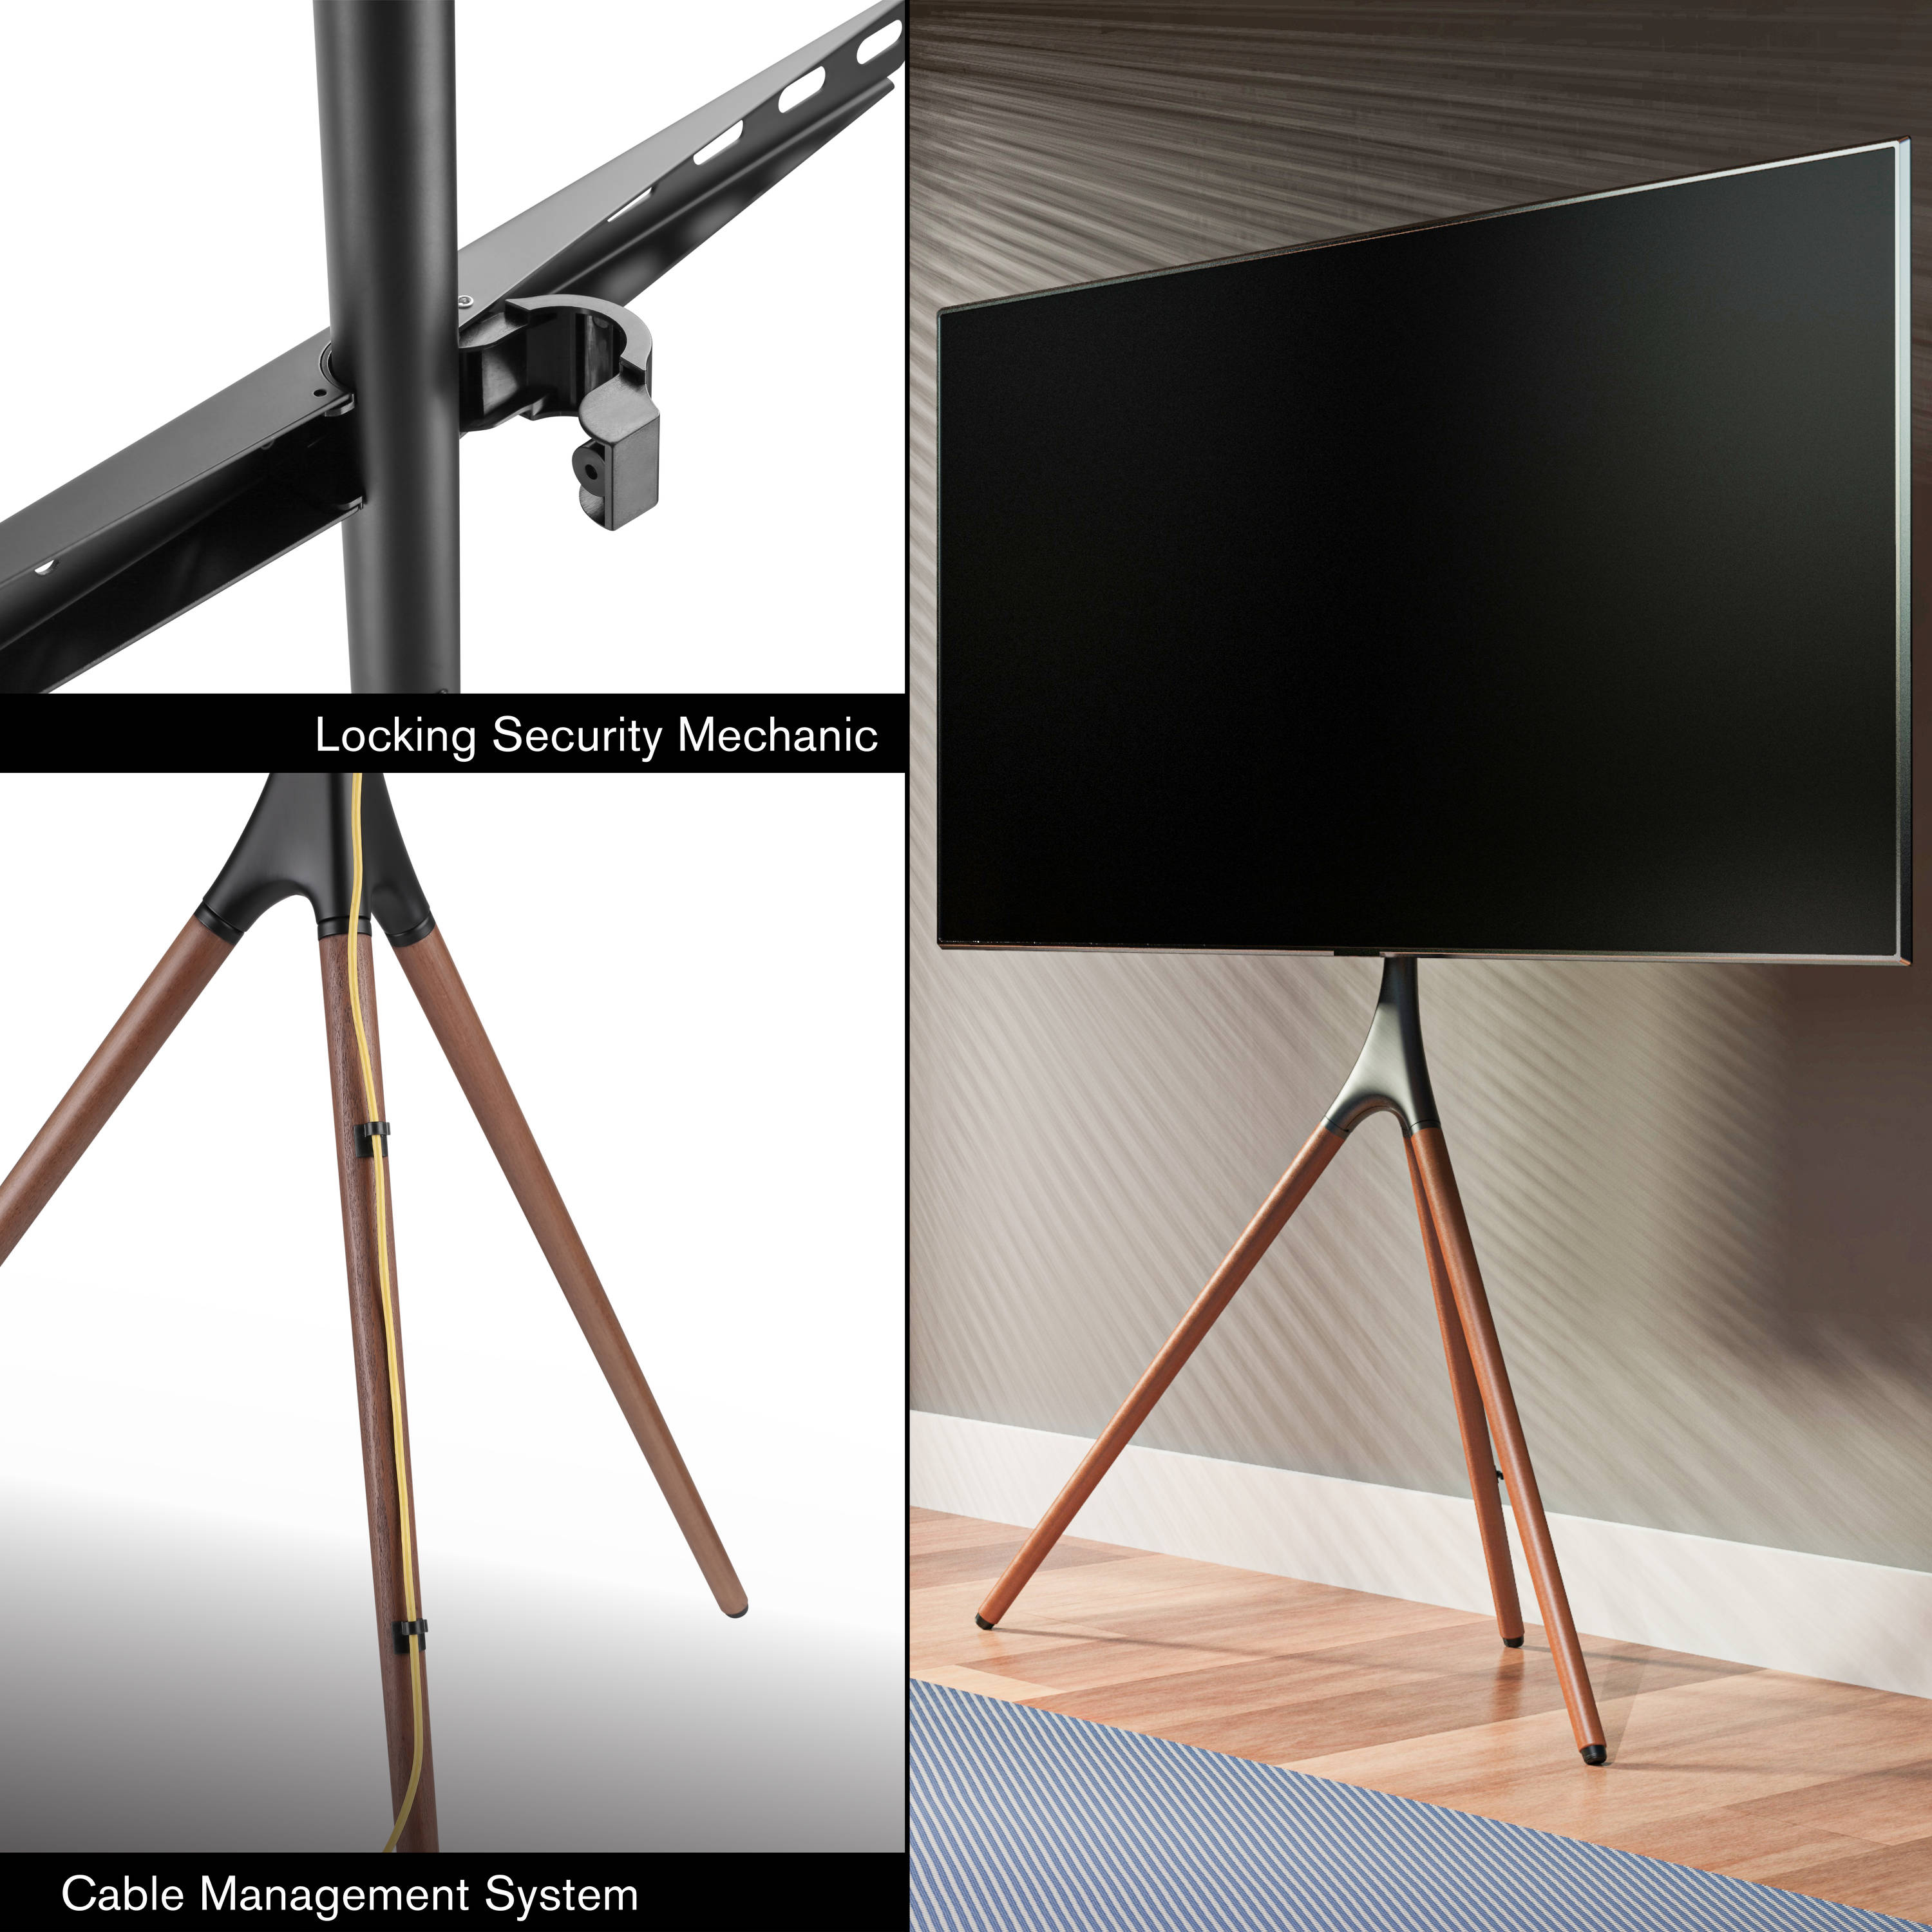 Promounts Fixed Freestanding Tv Mount Fits TVs up to 70-in (Hardware Included)